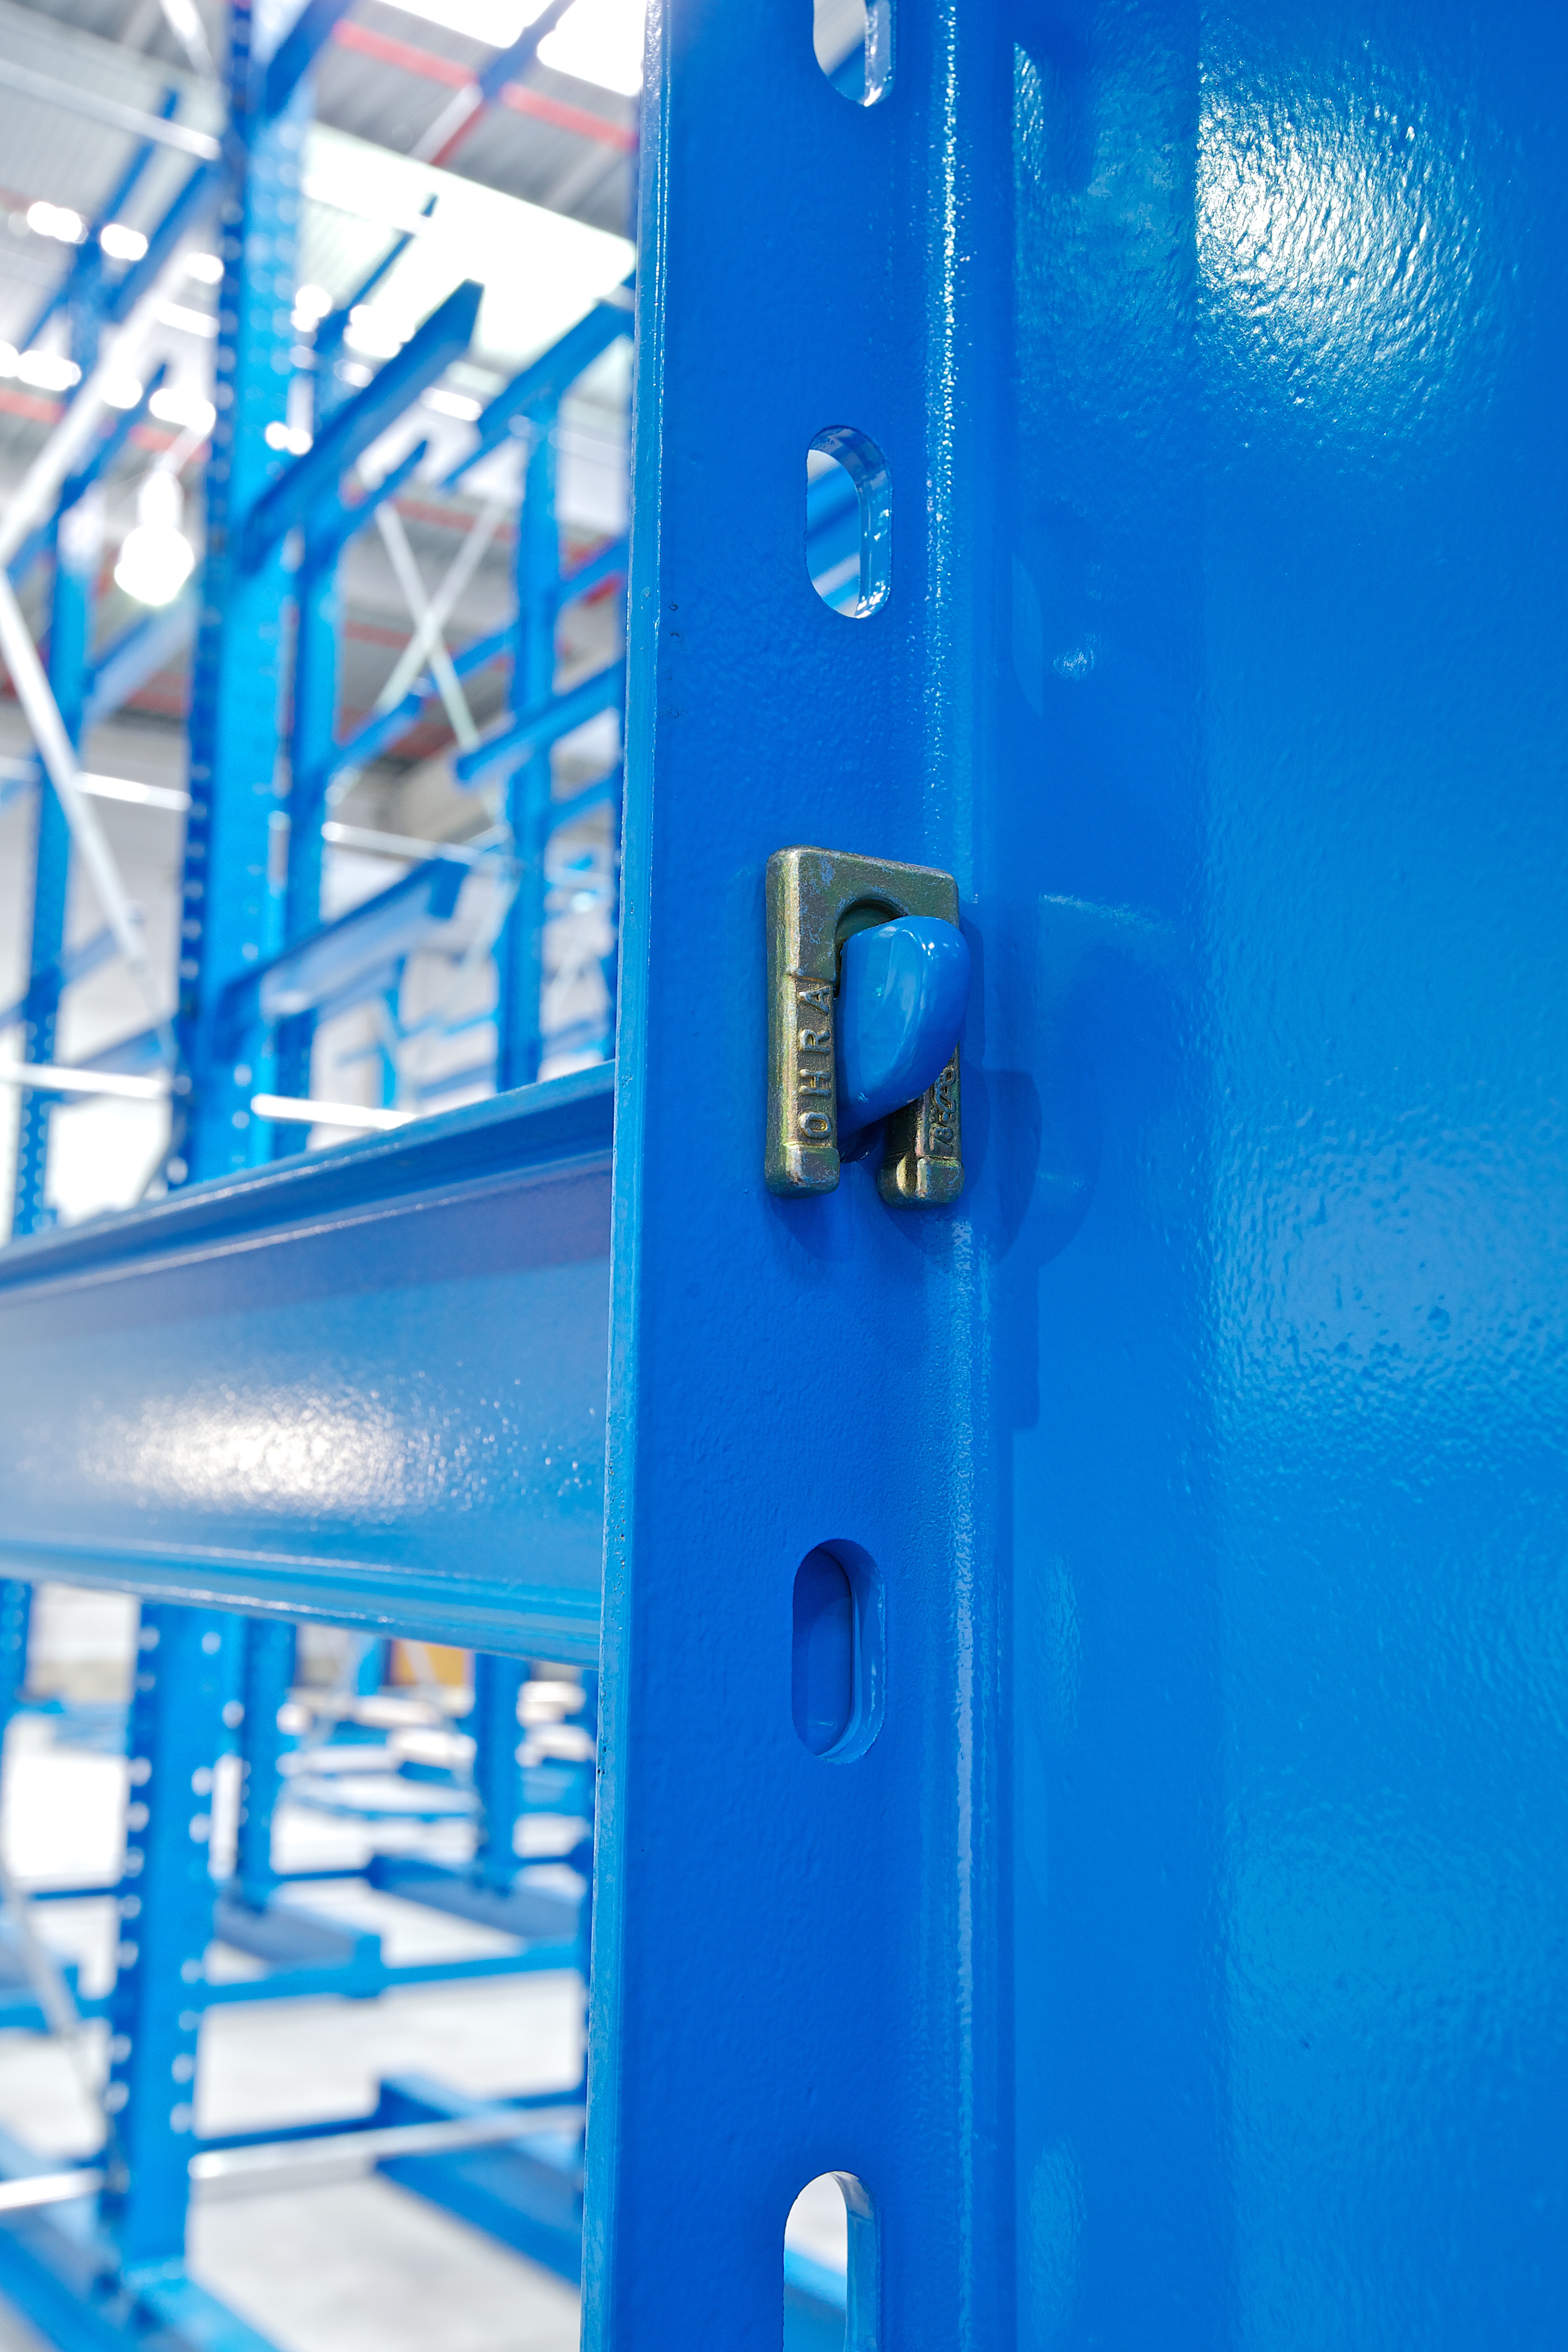 [Translate "Slovenia"] Cantilever racking system by OHRA